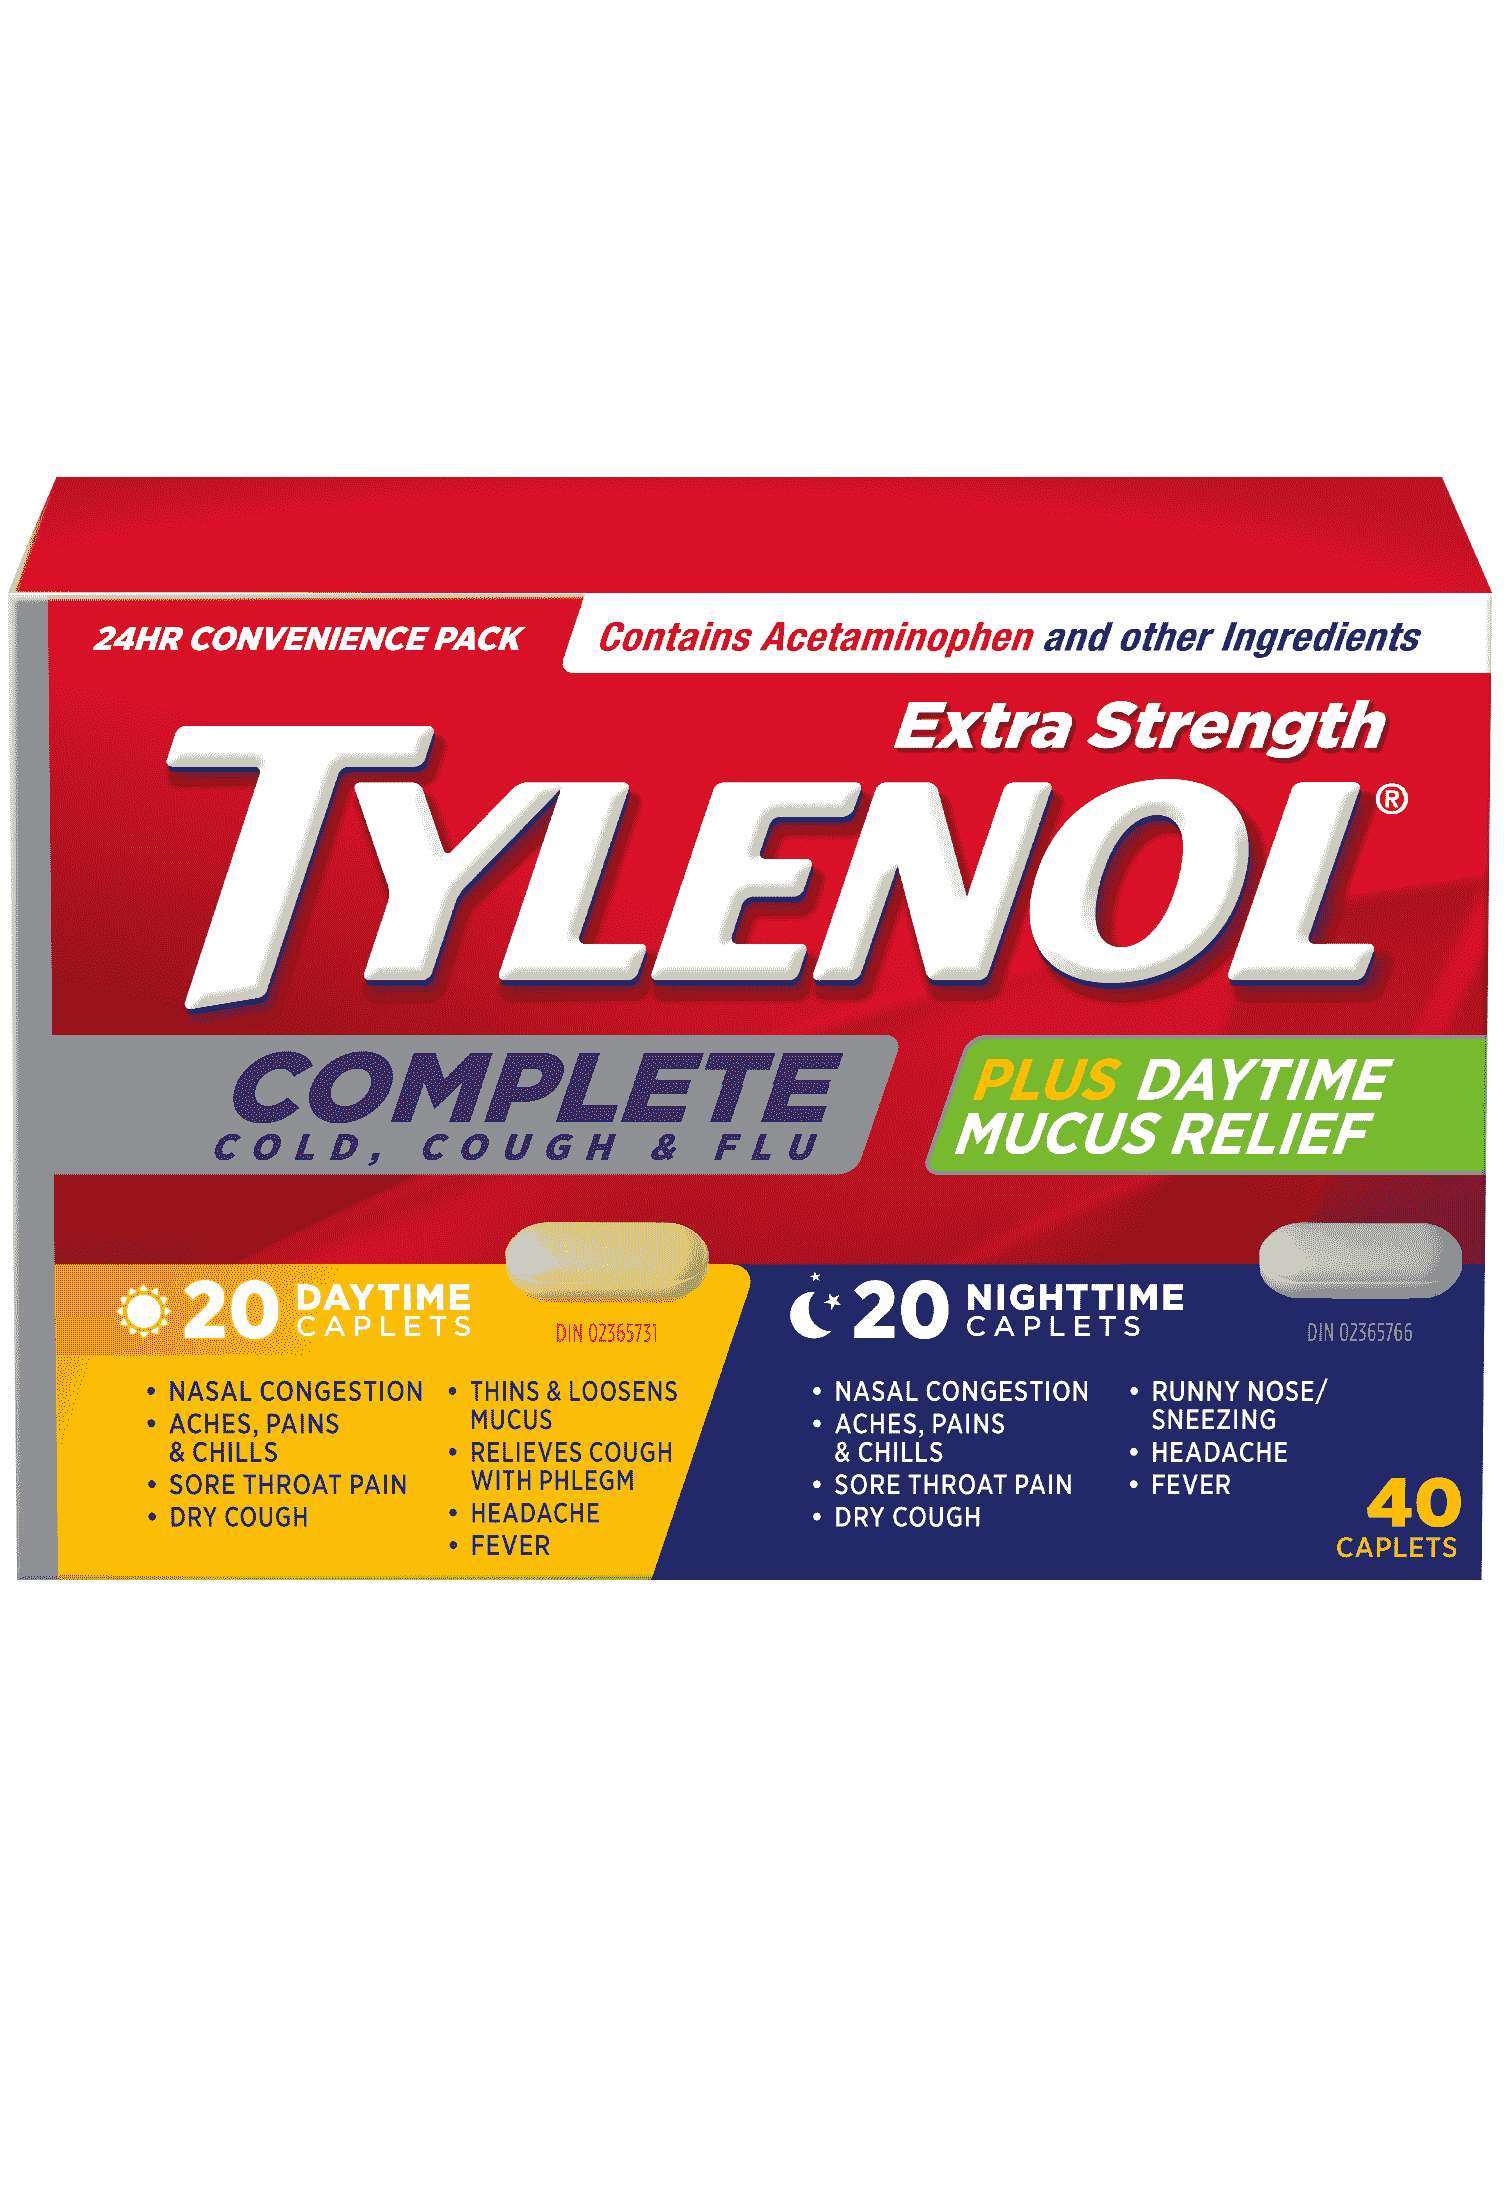 TYLENOL® Complete Cold, Cough & Flu